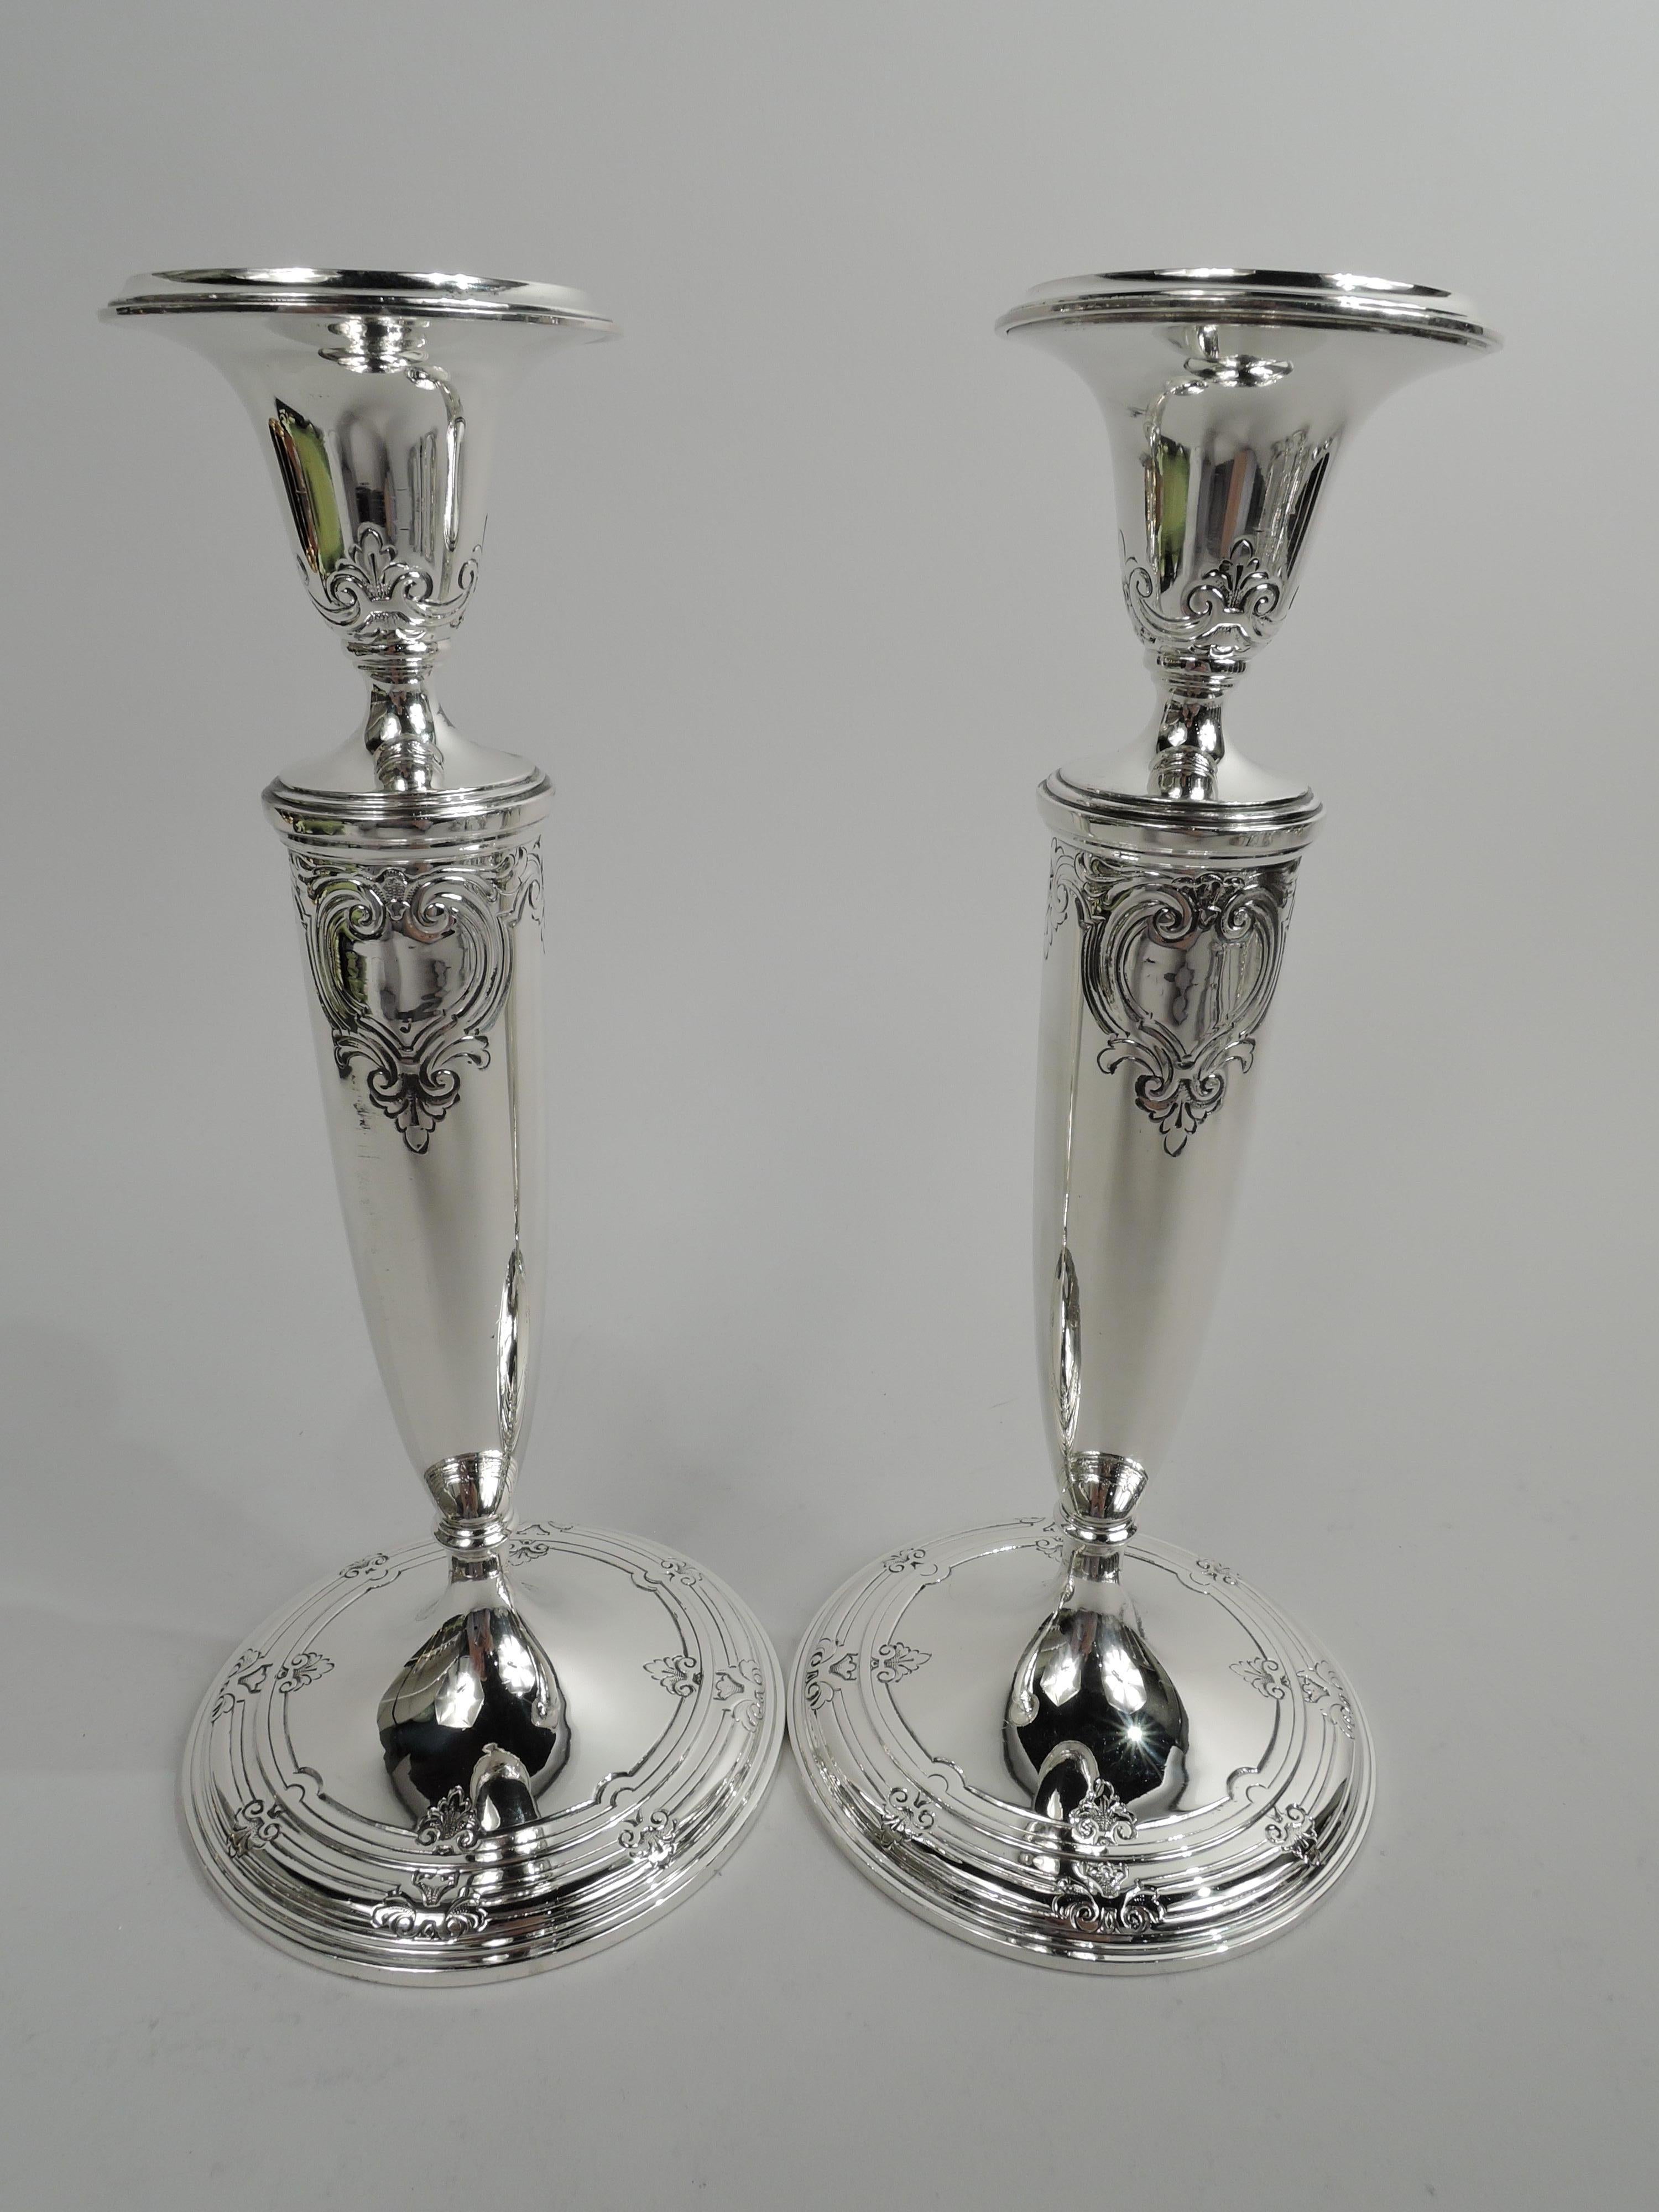 Pair of Edwardian Classical sterling silver candlesticks. Made by Tiffany & Co. in New York, ca 1922. Tapering socket with detachable bobeche on tapering shaft with base knop and raised foot. Chased leafing scrollwork and two cartouches of which one